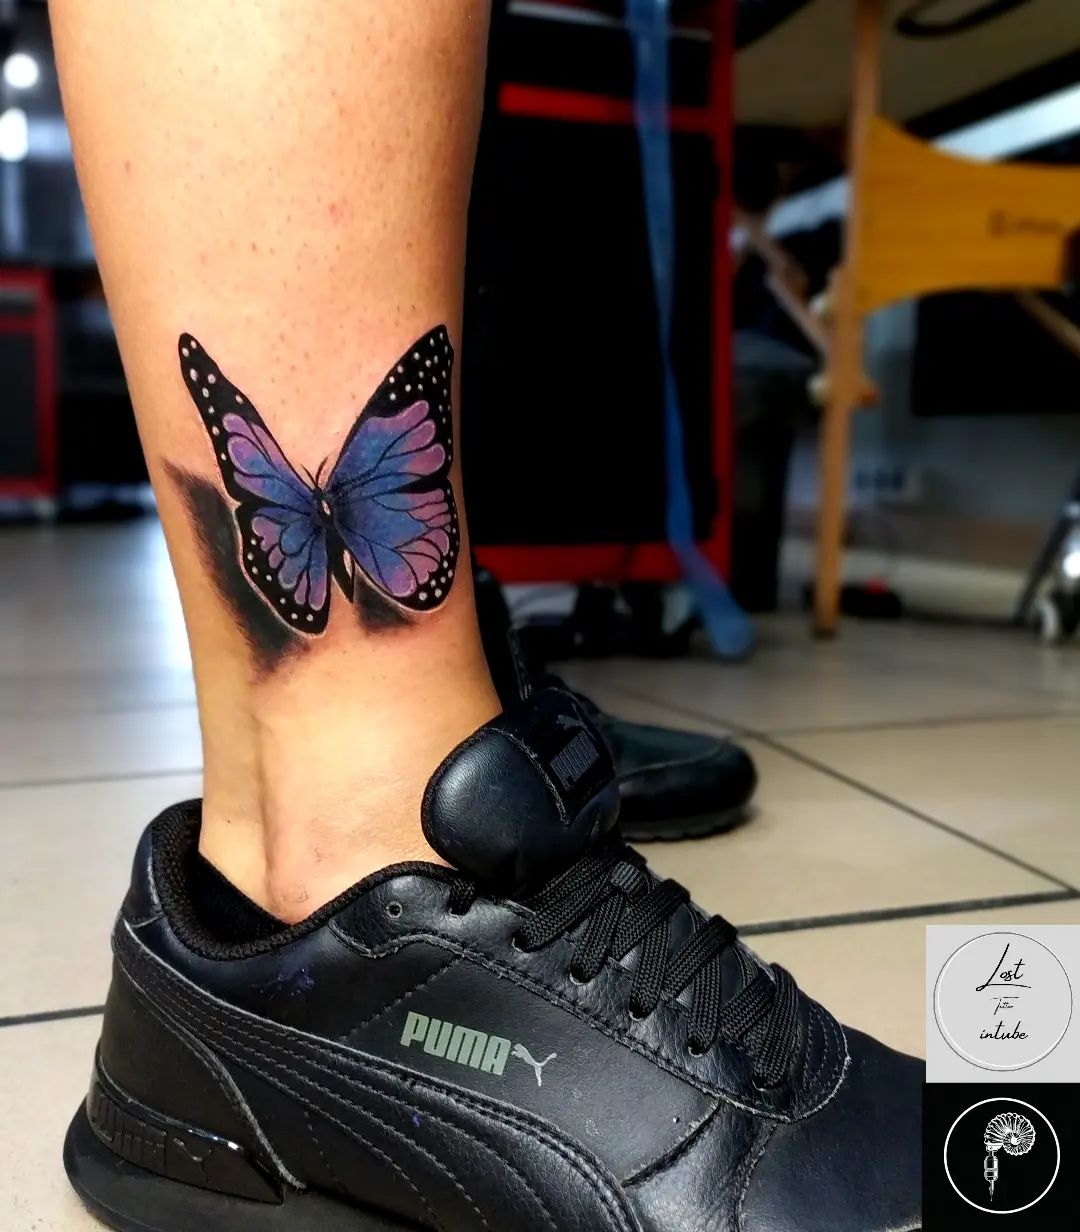 Butterflies are used to describe our inner nature, as well as our wish to travel the world. If you’re a soft and open person who is always honest and in tune with his or her emotions, this will look so good on you.